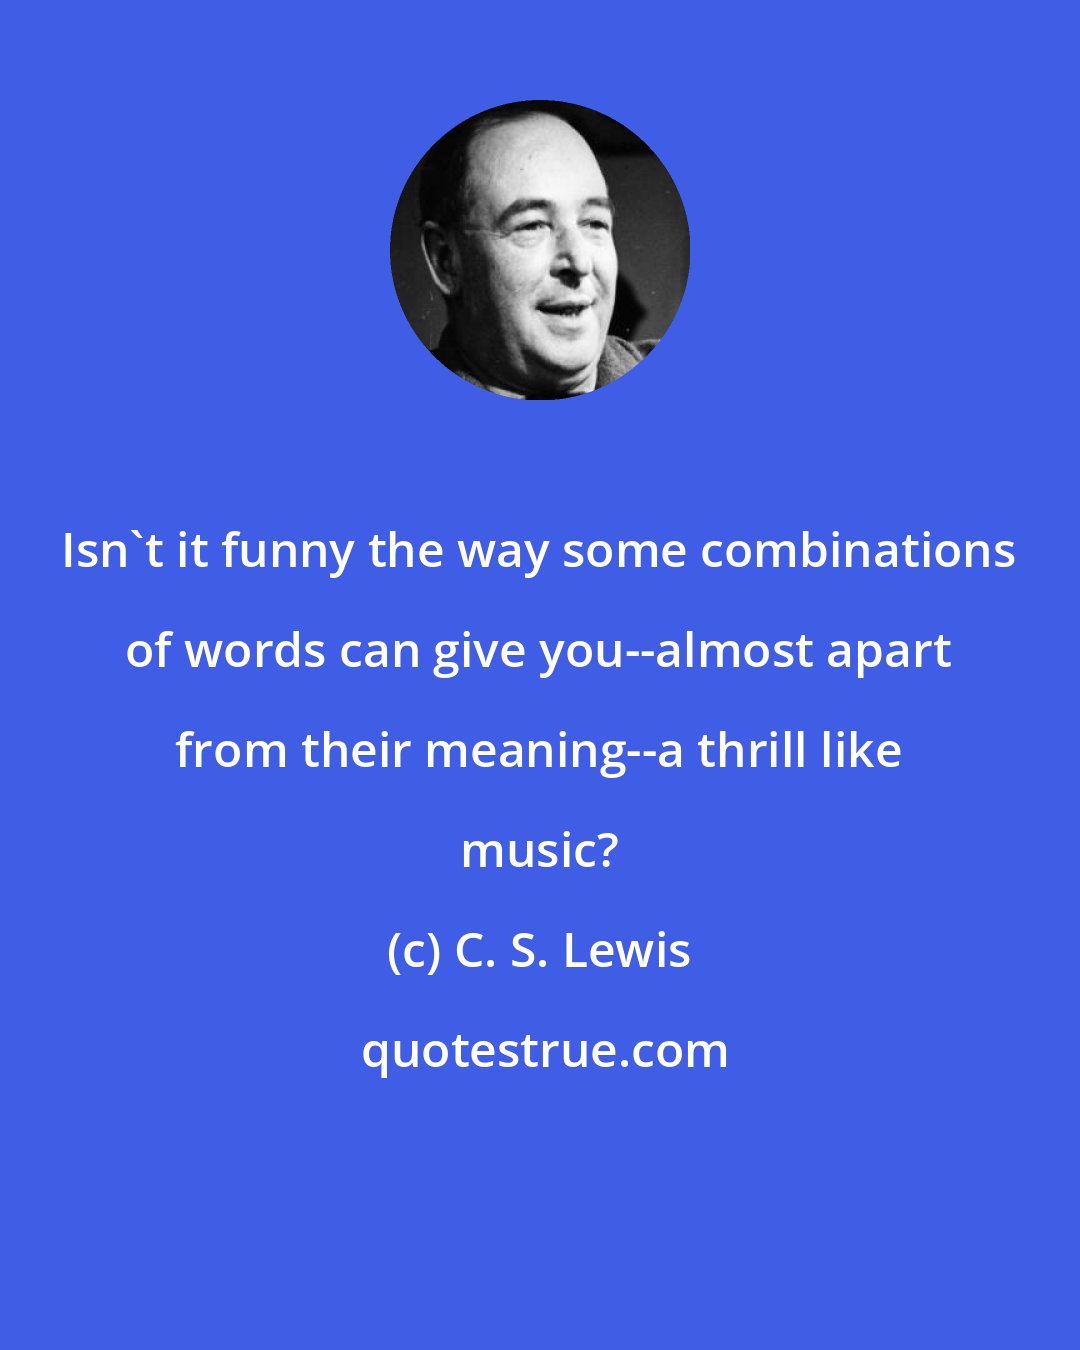 C. S. Lewis: Isn't it funny the way some combinations of words can give you--almost apart from their meaning--a thrill like music?